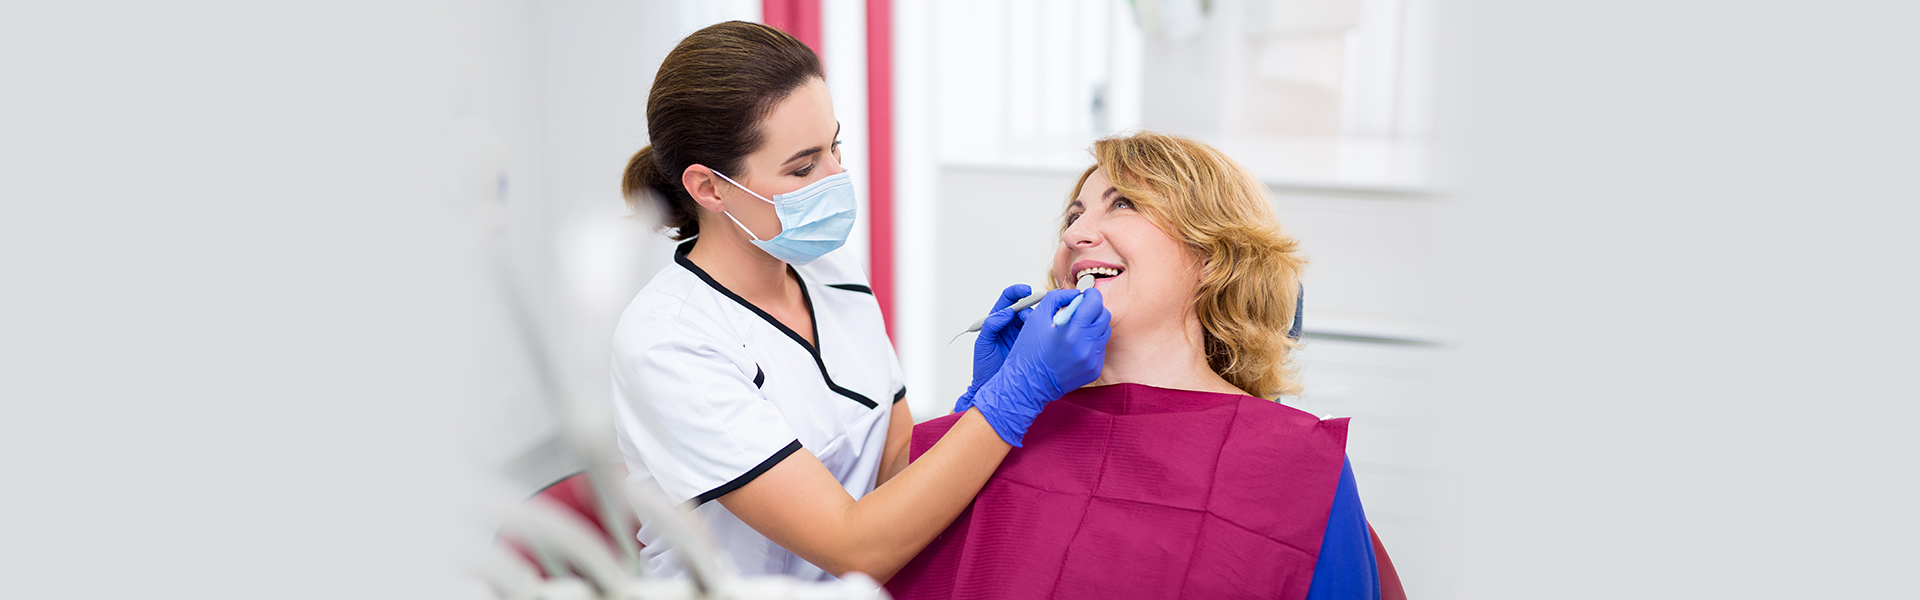 What Dental Treatments a General Dentist Offers?